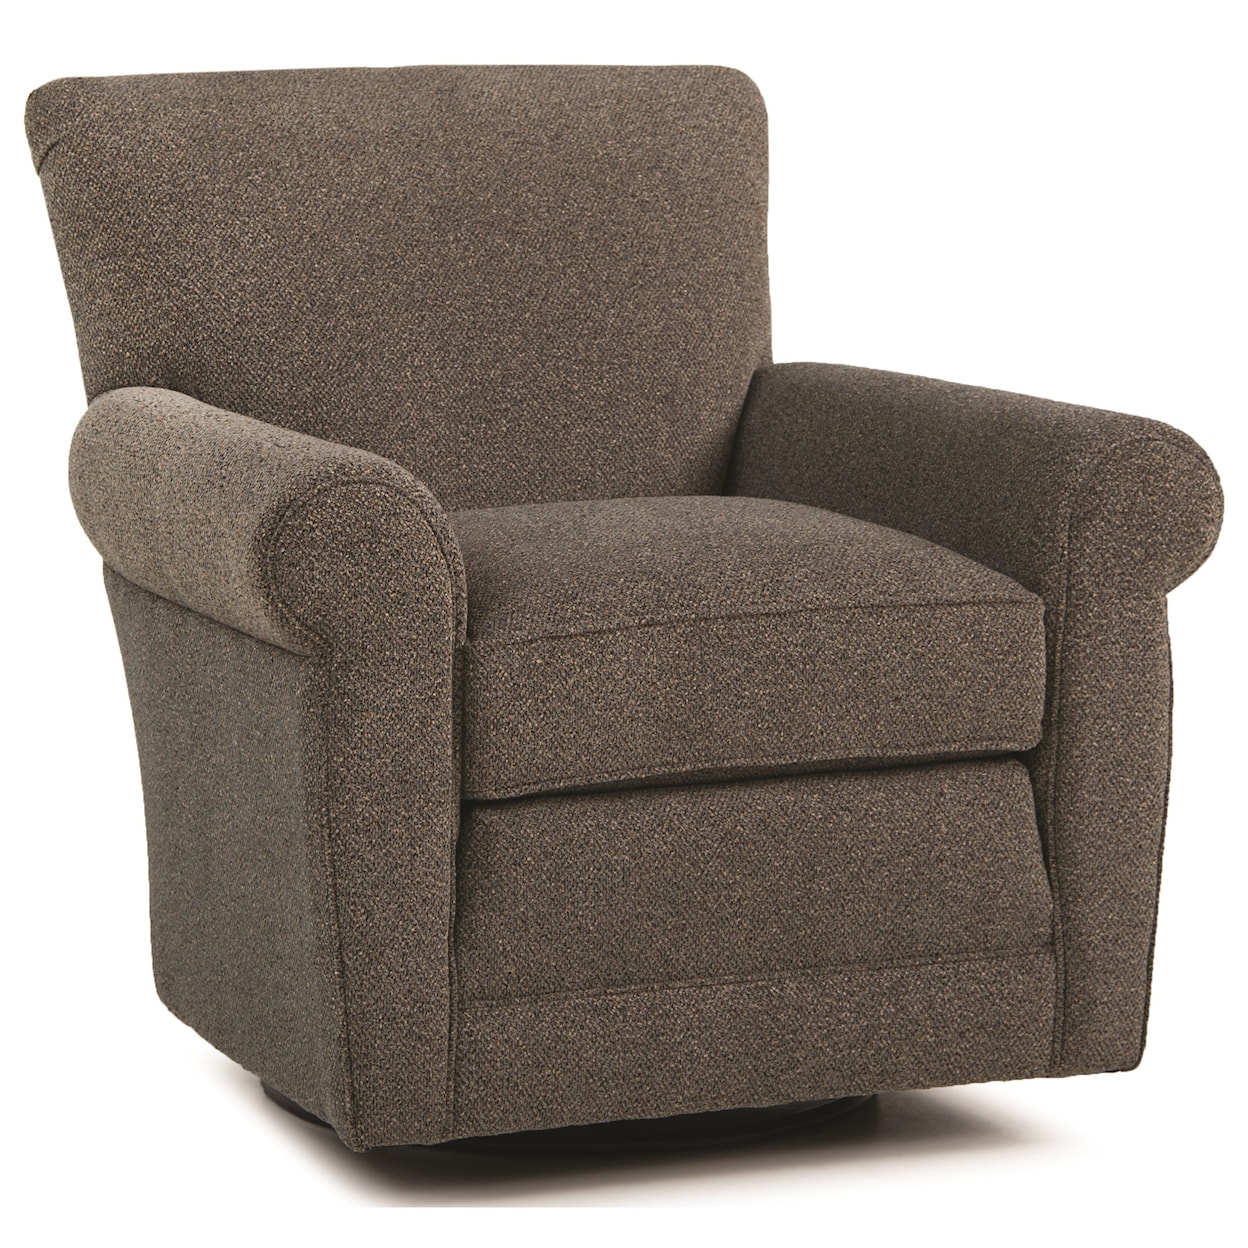 Smith Brothers 514 Swivel Glider Chair